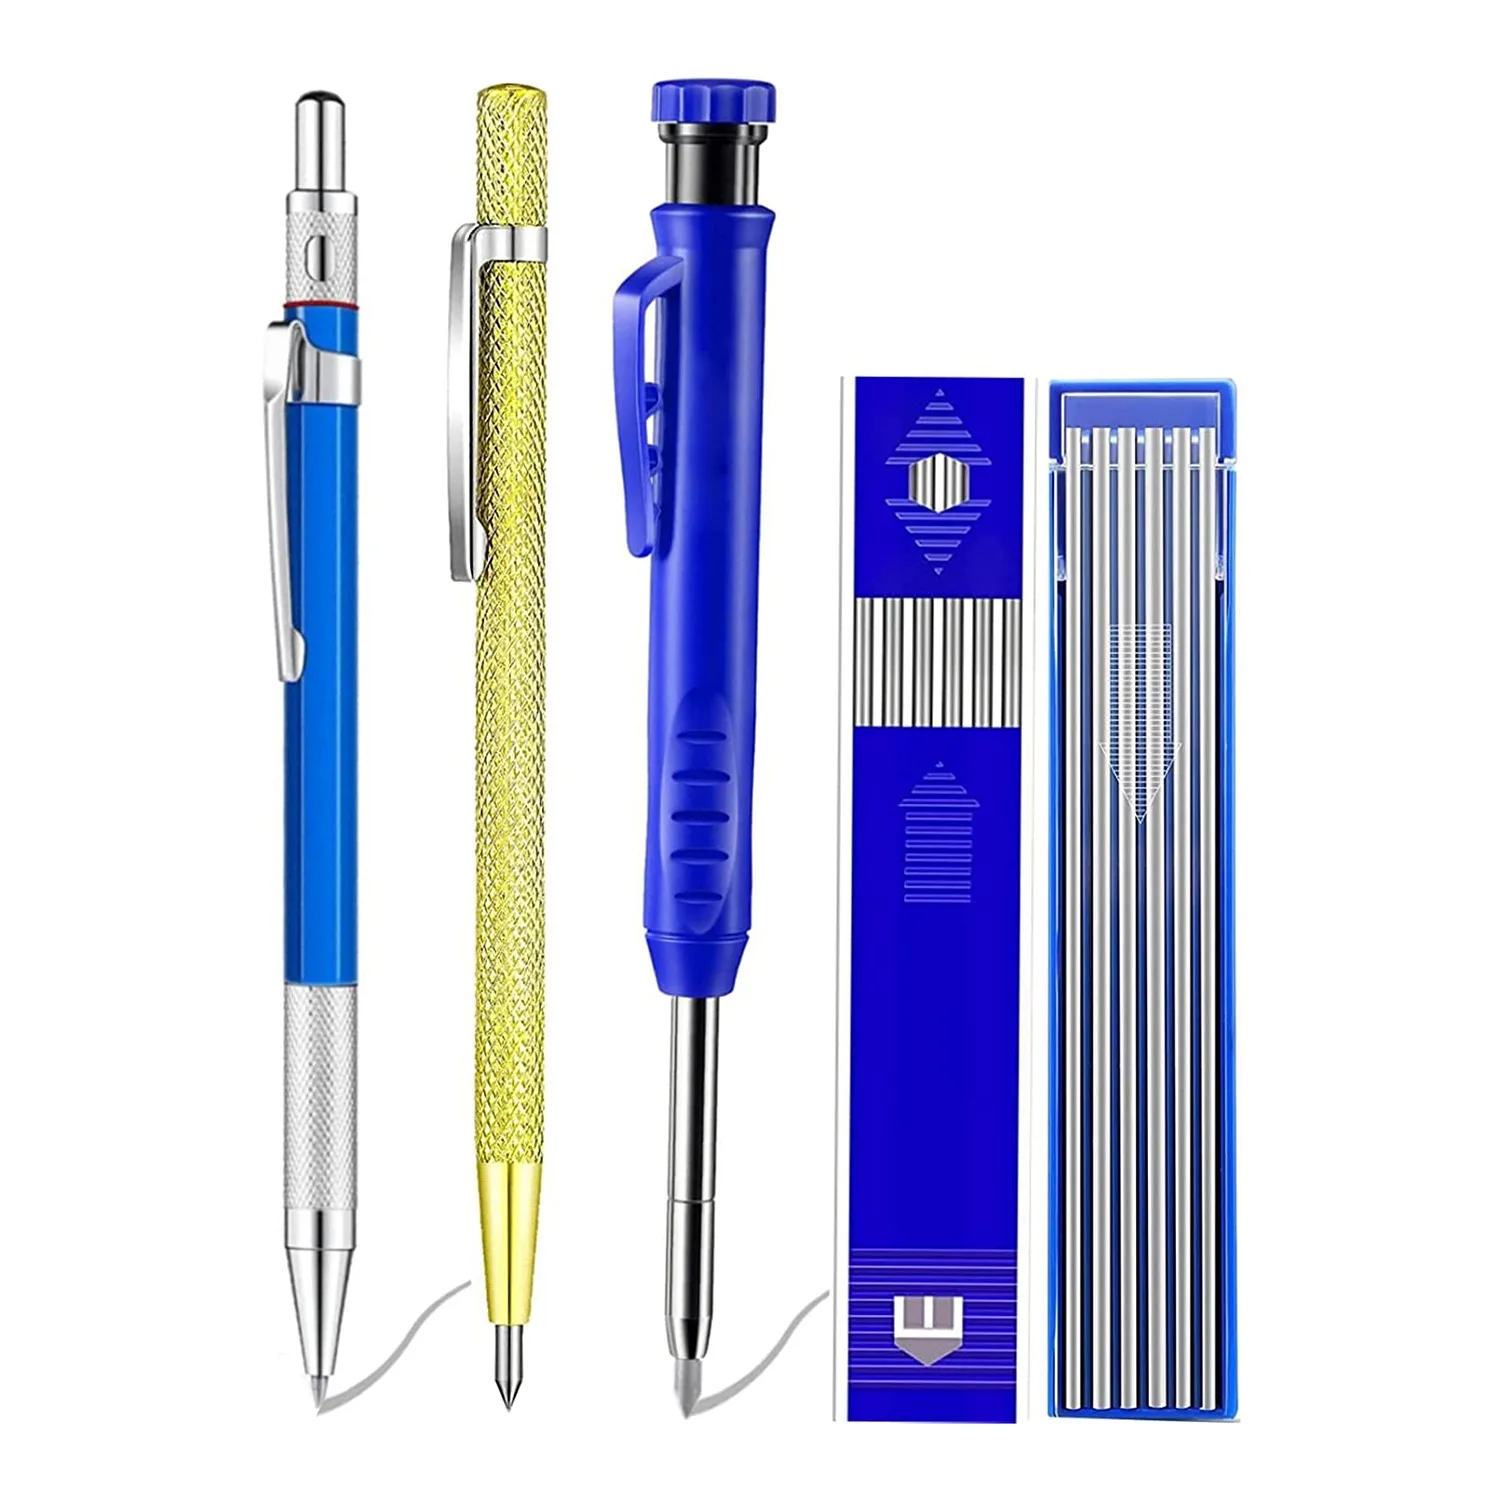 5 Packs Welders Pencil Set with Carbide Scriber Tool Solid Marker Metal Marking Tool Built-in Sharpener solid carpenter pencil set built in sharpener leads for woodworking construction marker deep hole mechanical pencil tool marking